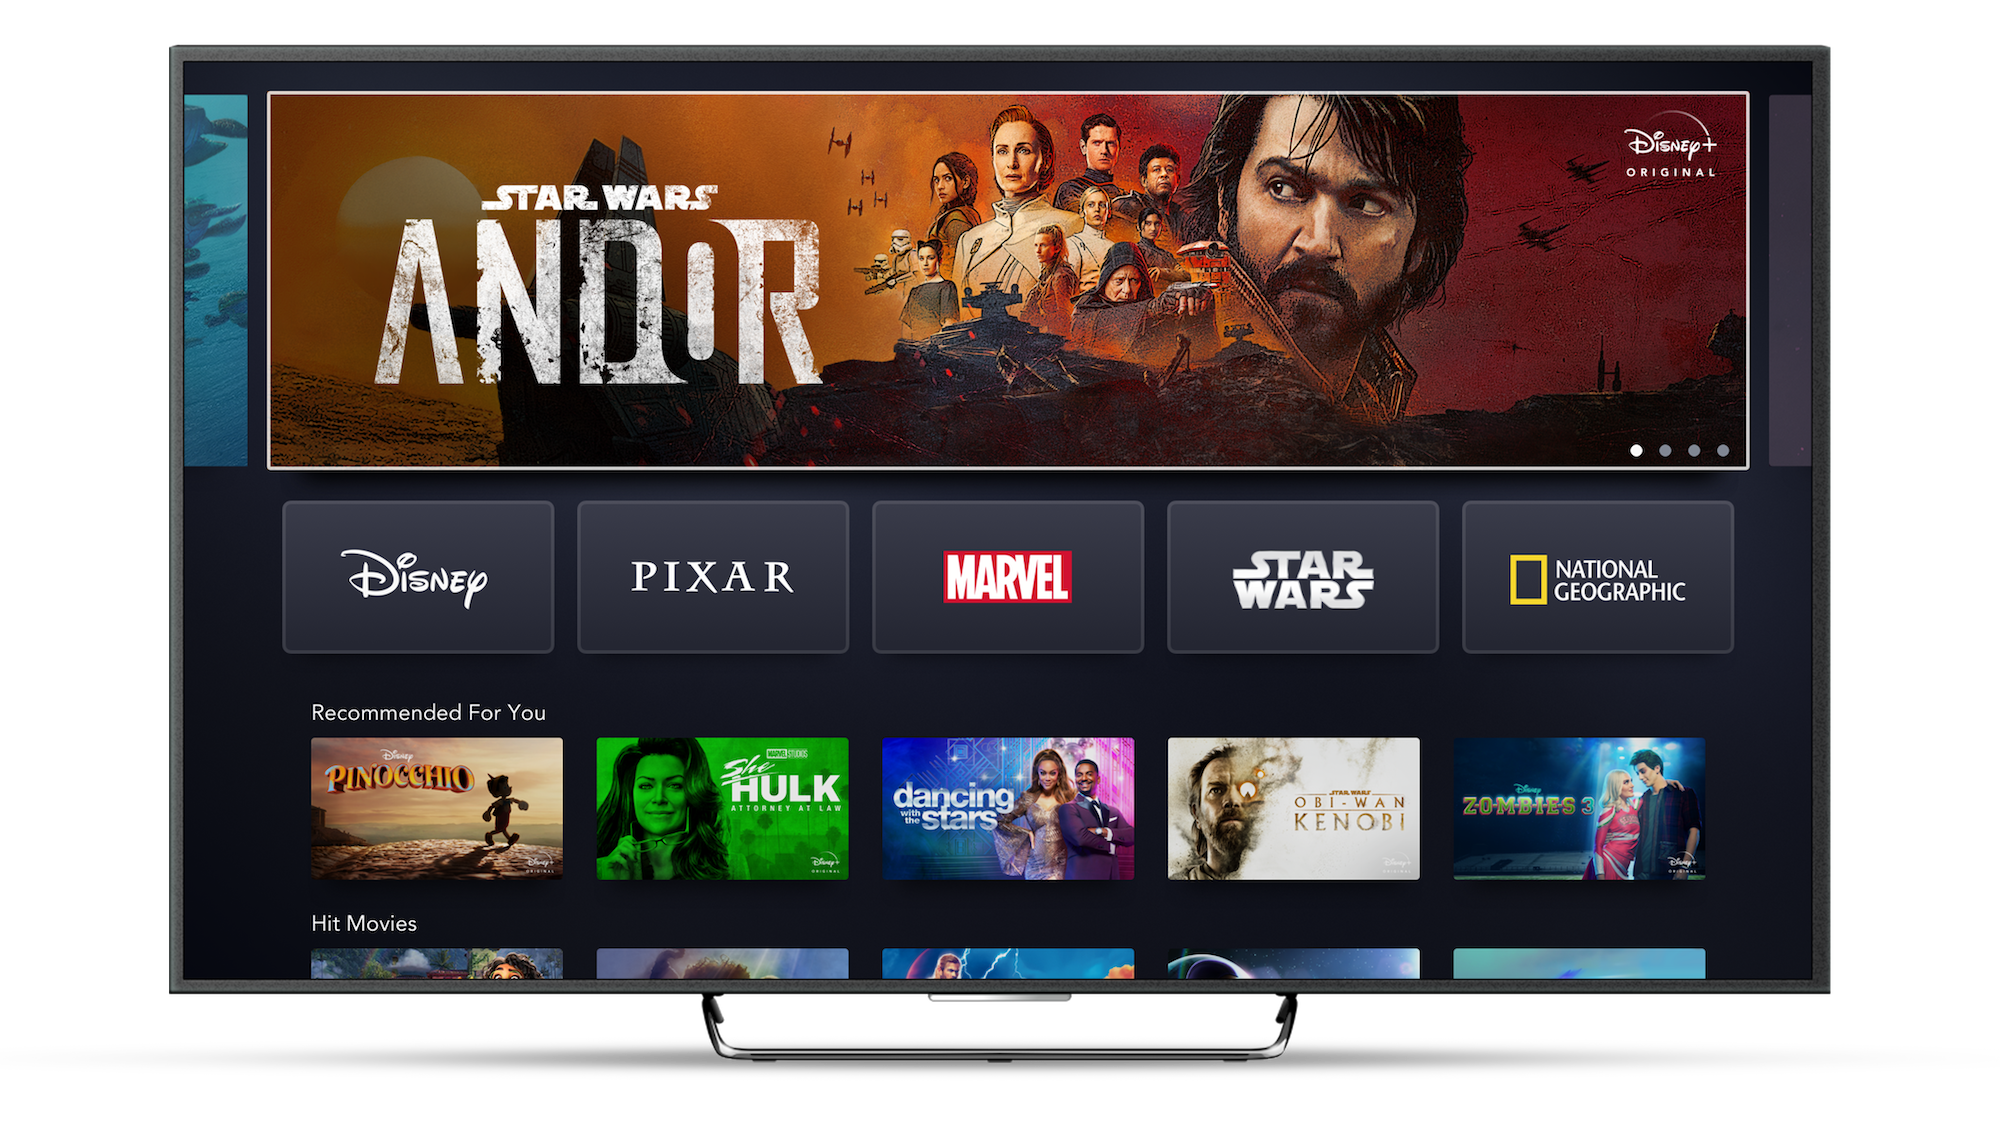 Disney+ App Home Page on Connected TV